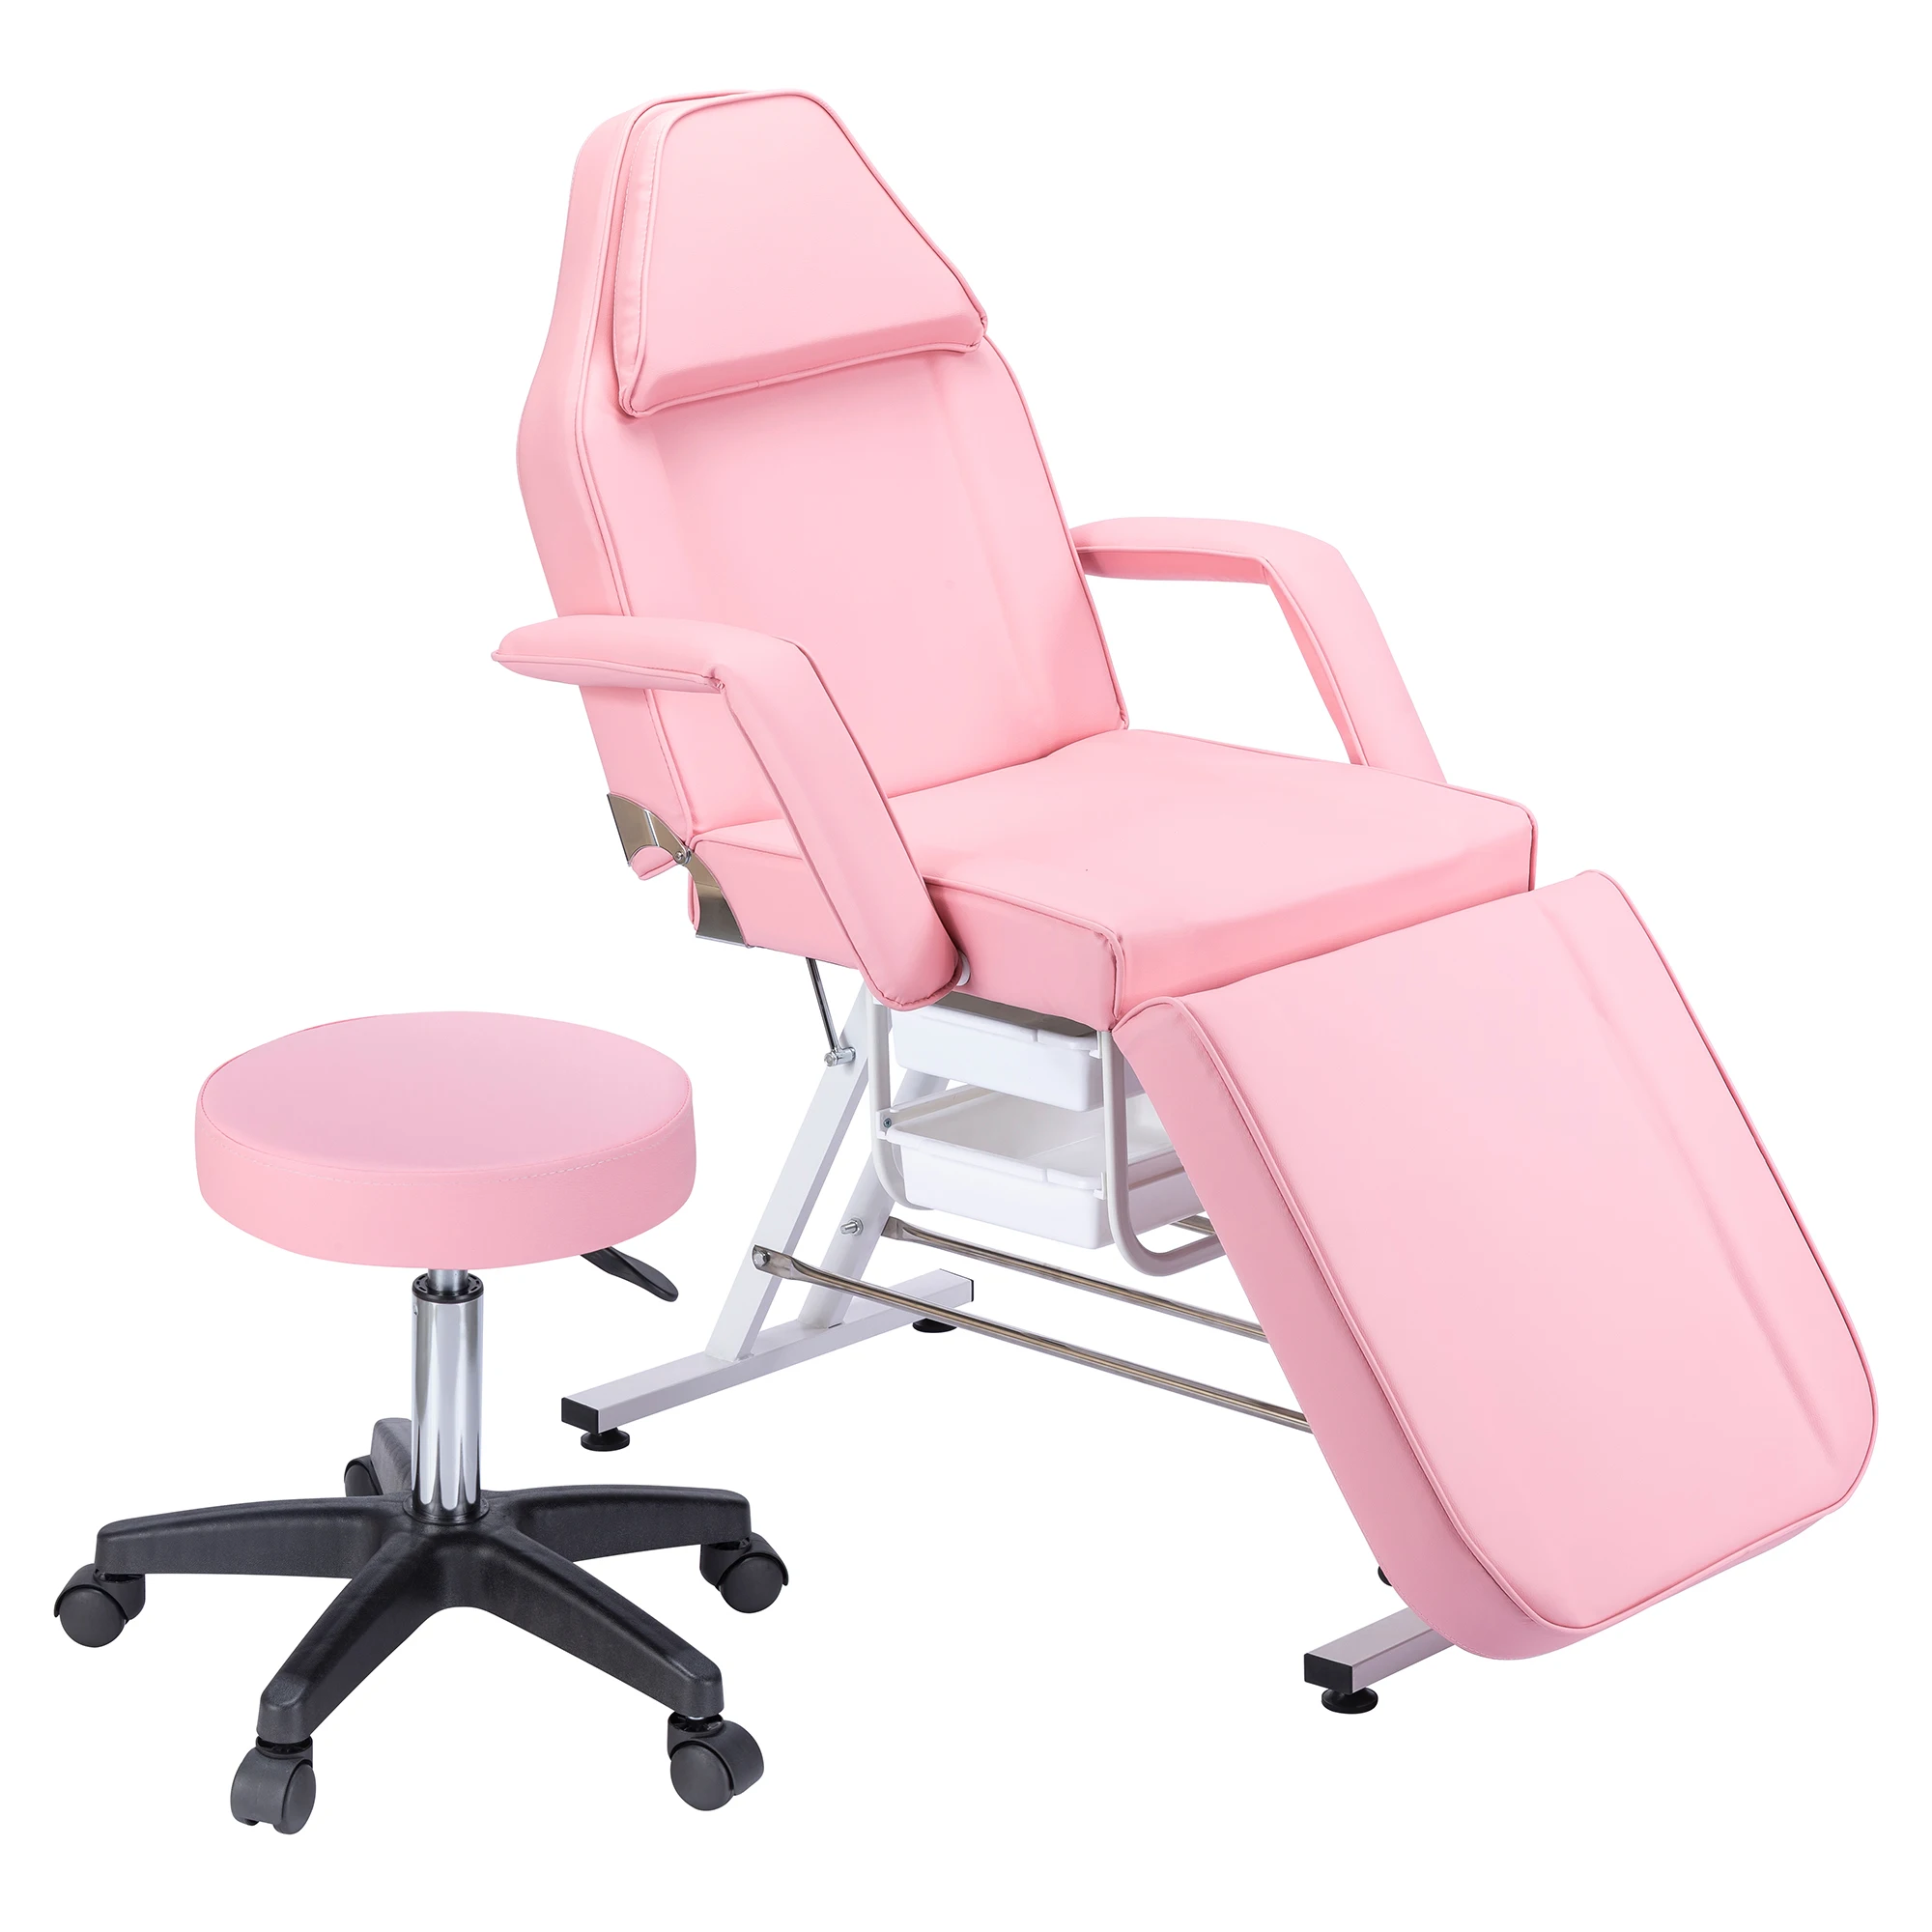 Massage Salon Tattoo Chair W/2 Trays&1 Stool Multi-Purpose Esthetician Bed 3-Section Facial Bed Table Adjustable Barber Spa